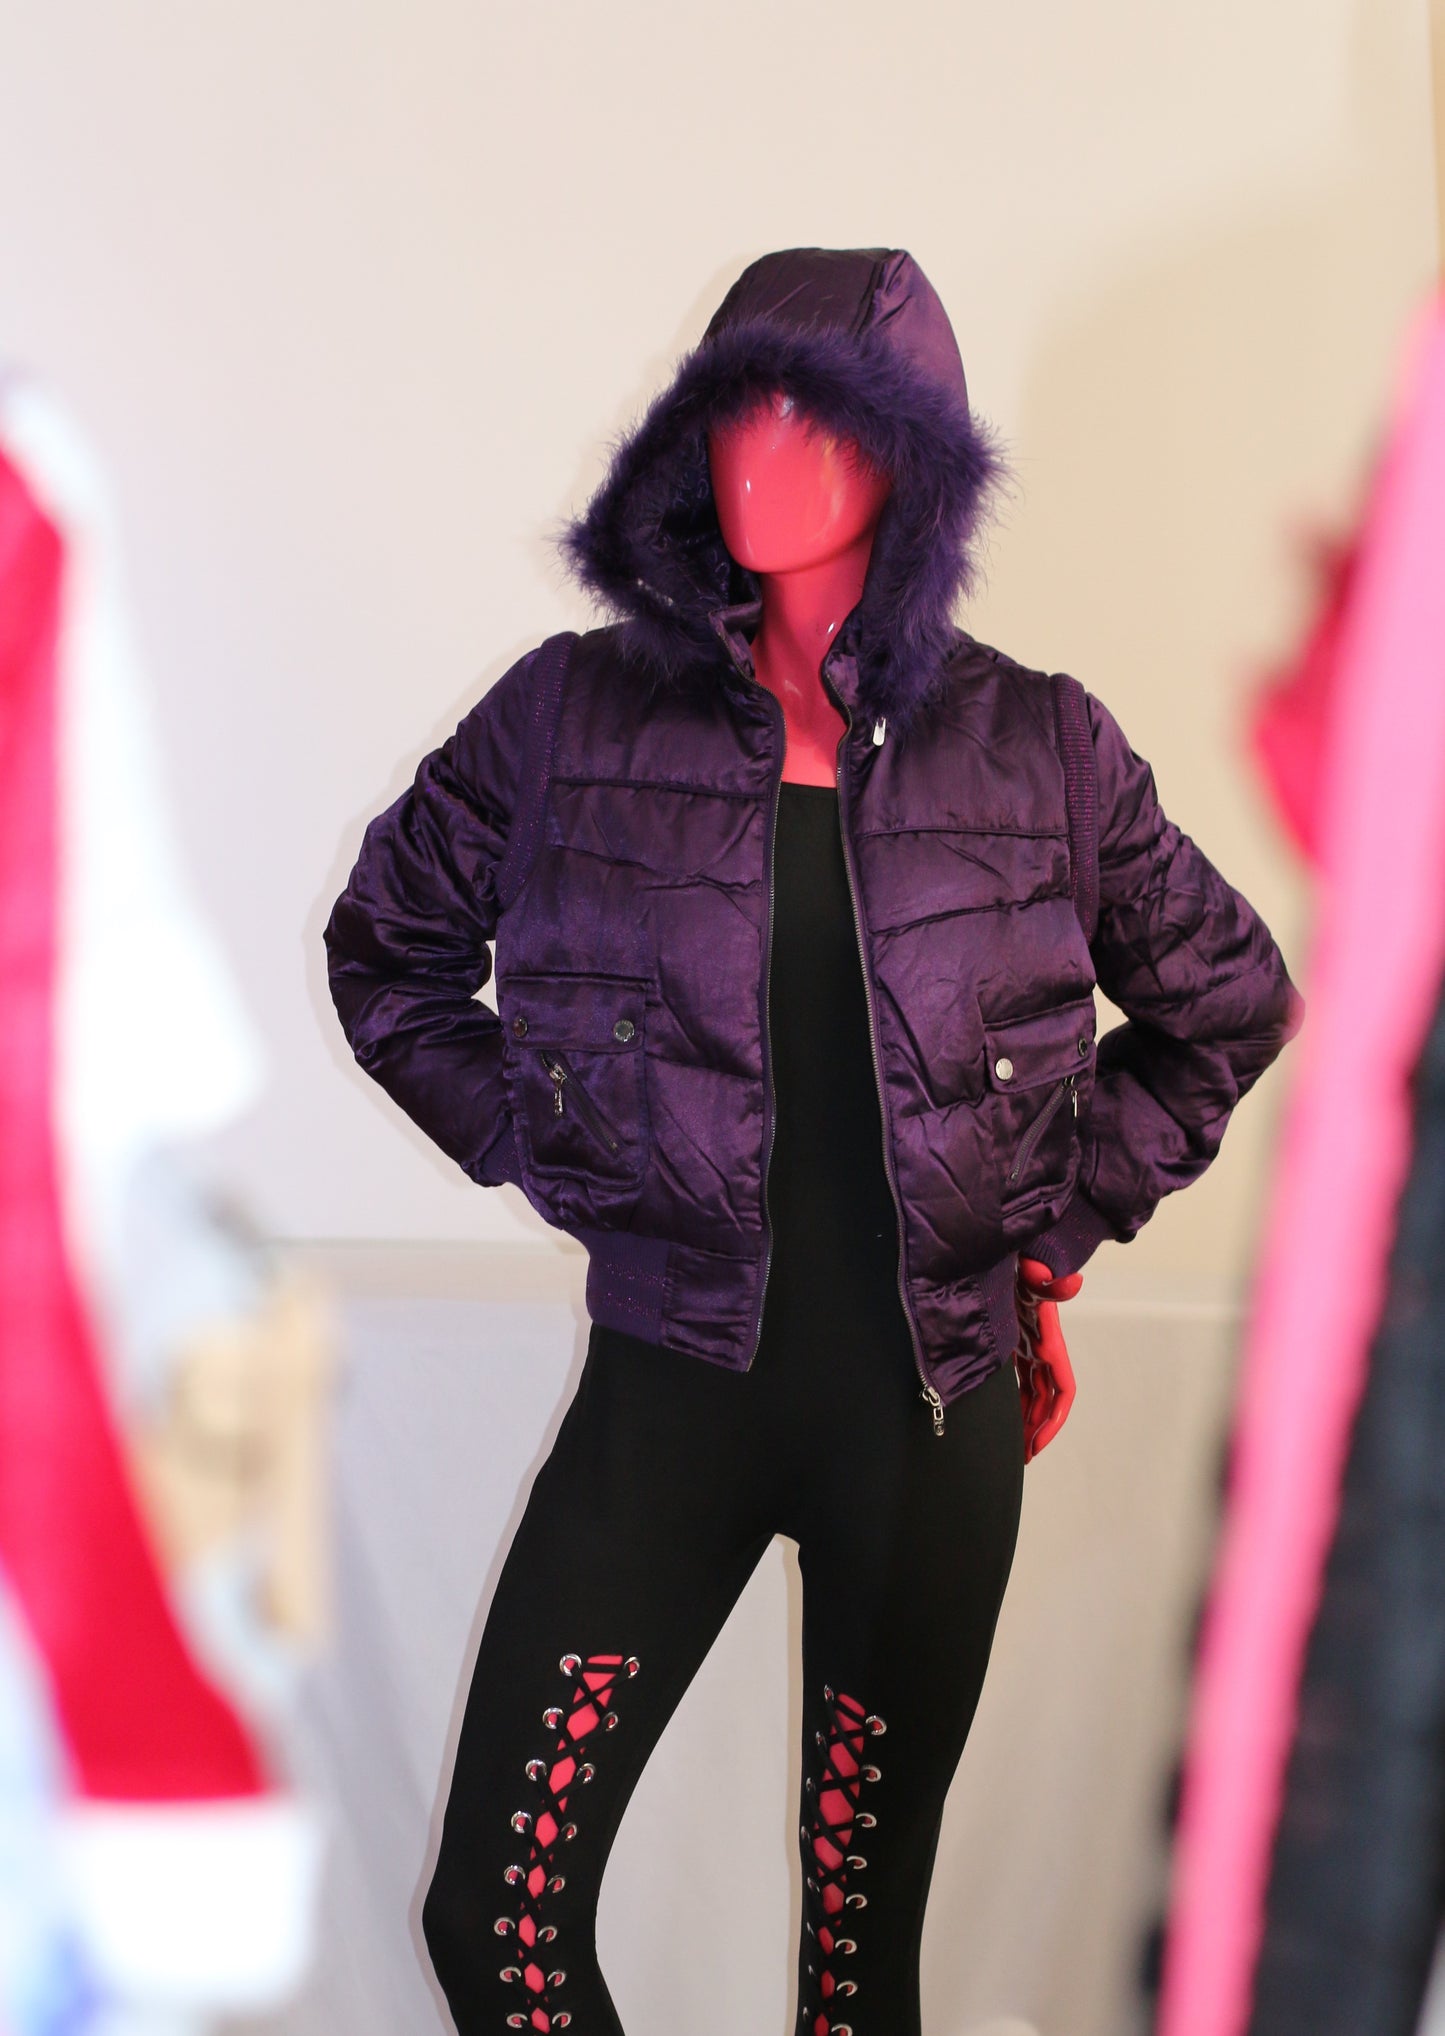 Women's Purple Quilted Puffer Jacket